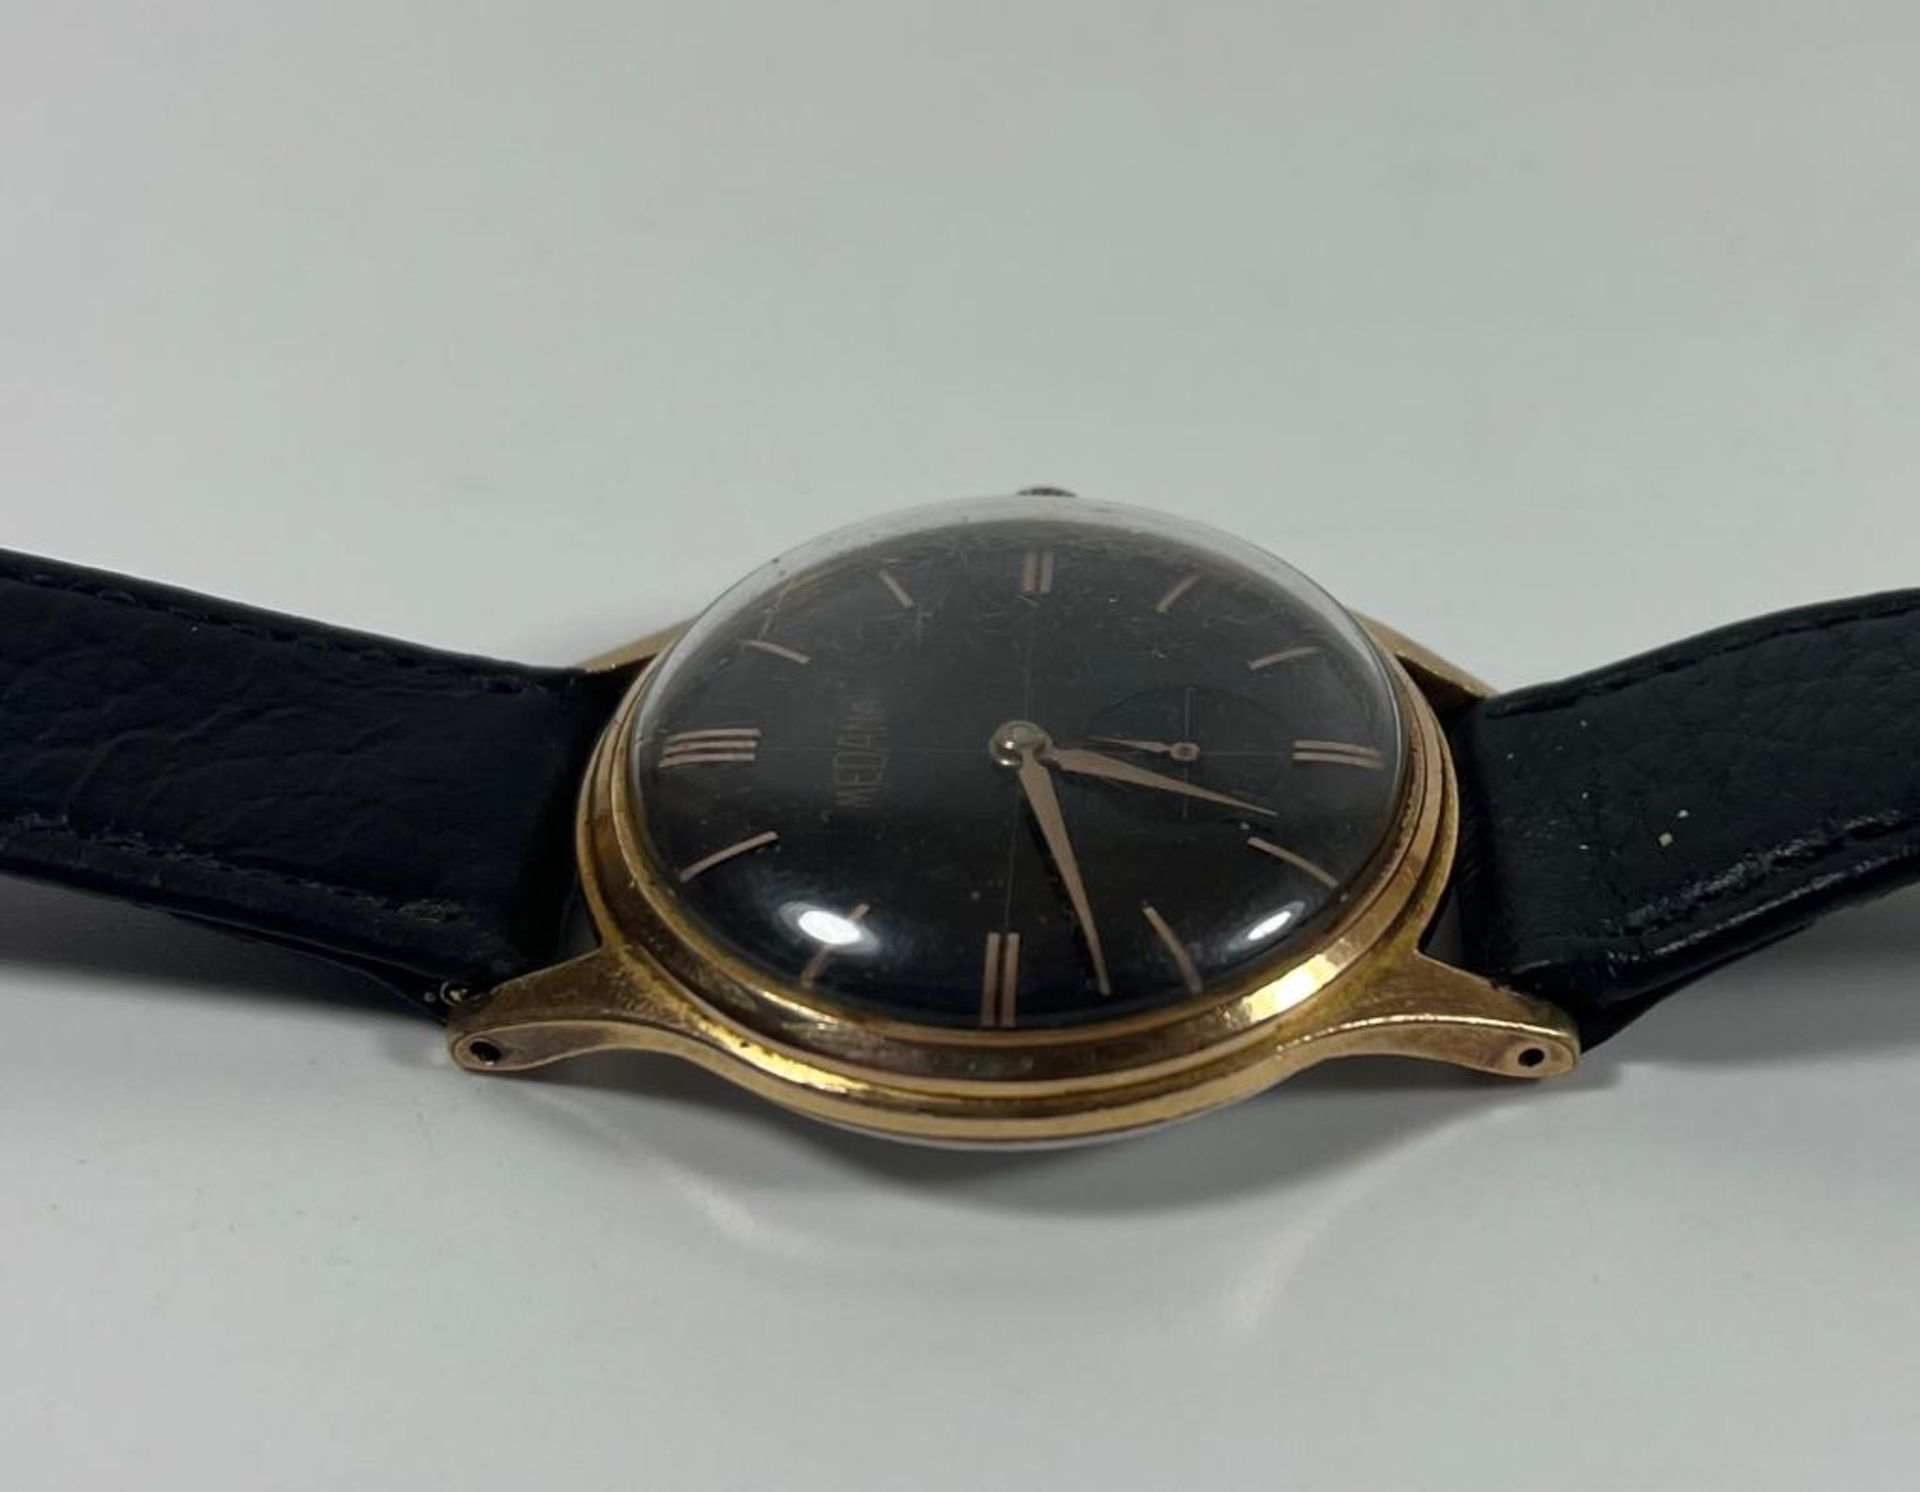 A VINTAGE SWISS MEDANA 1970S WATCH WITH SUBSIDIARY SECONDS DIAL, WORKING AT TIME OF LOTTING - Image 2 of 5